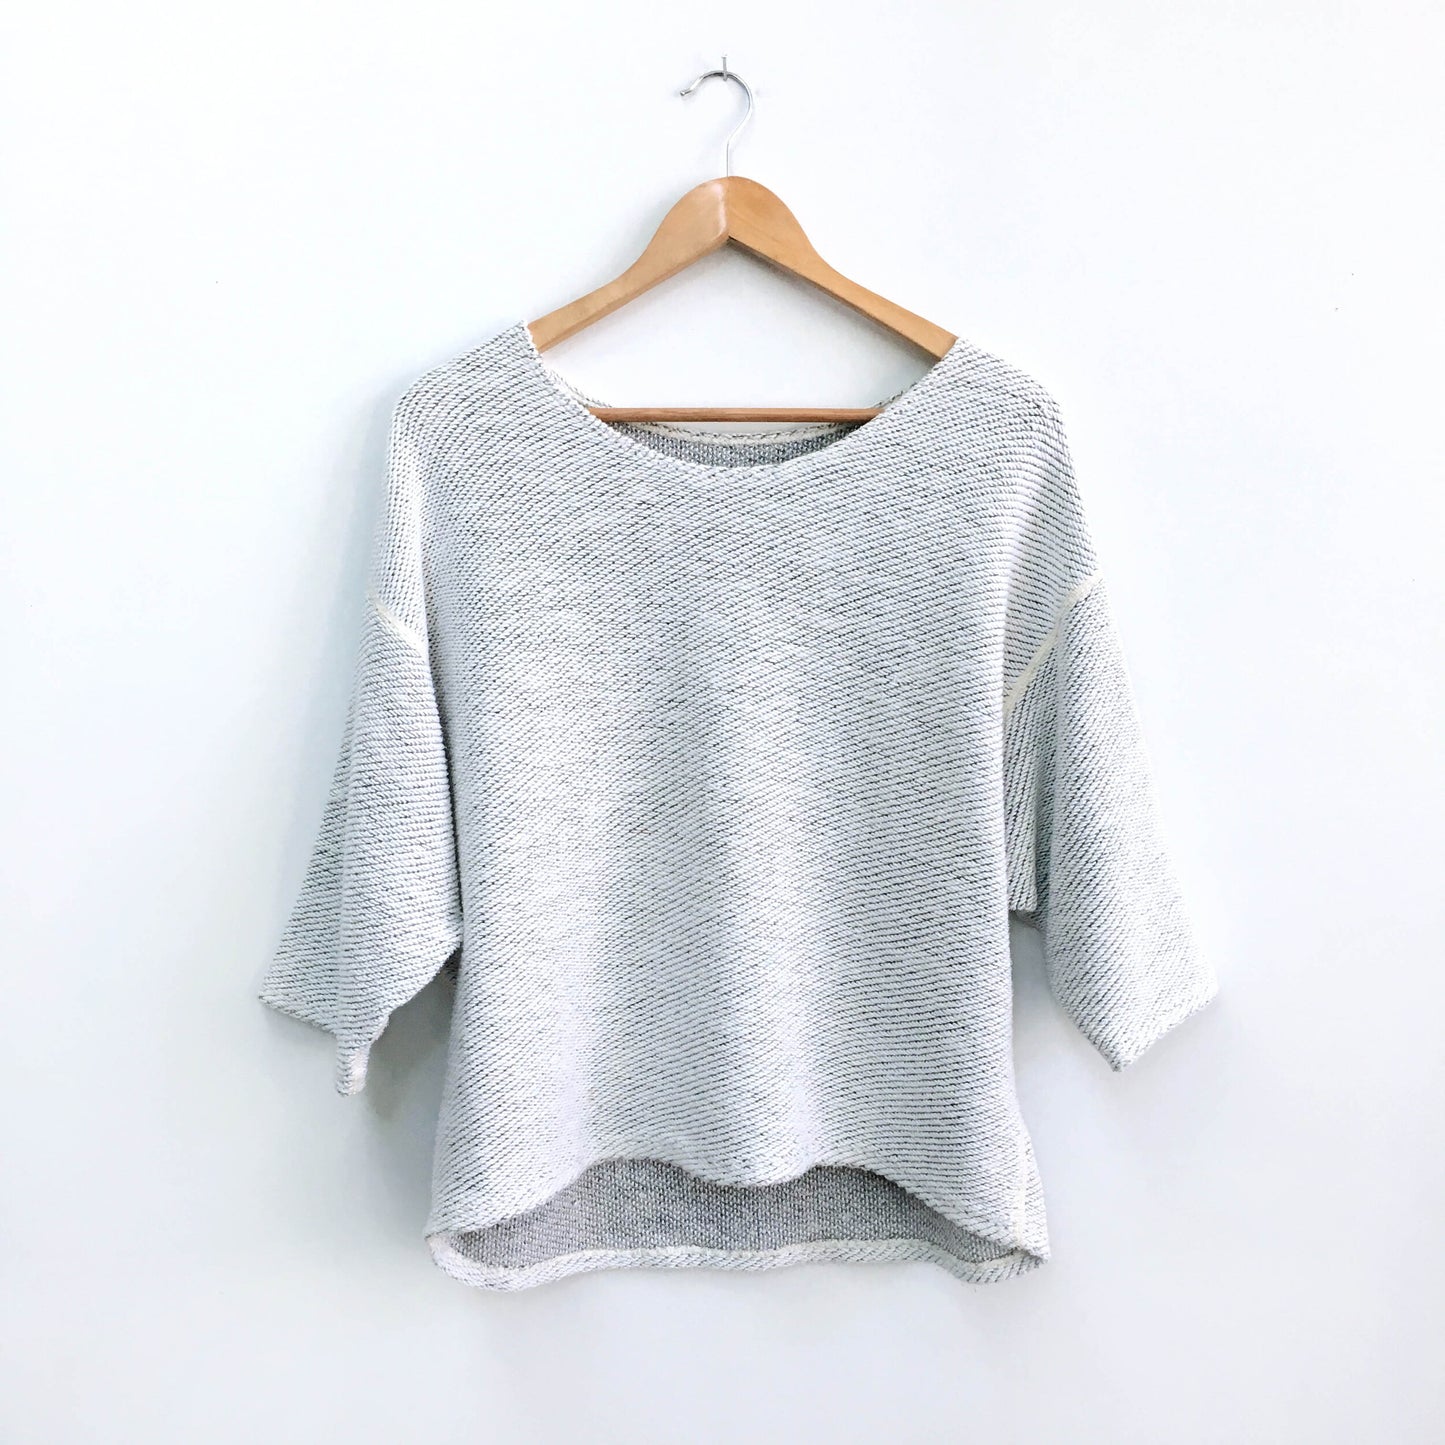 American Apparel Reversible Easy Sweater - size S/M